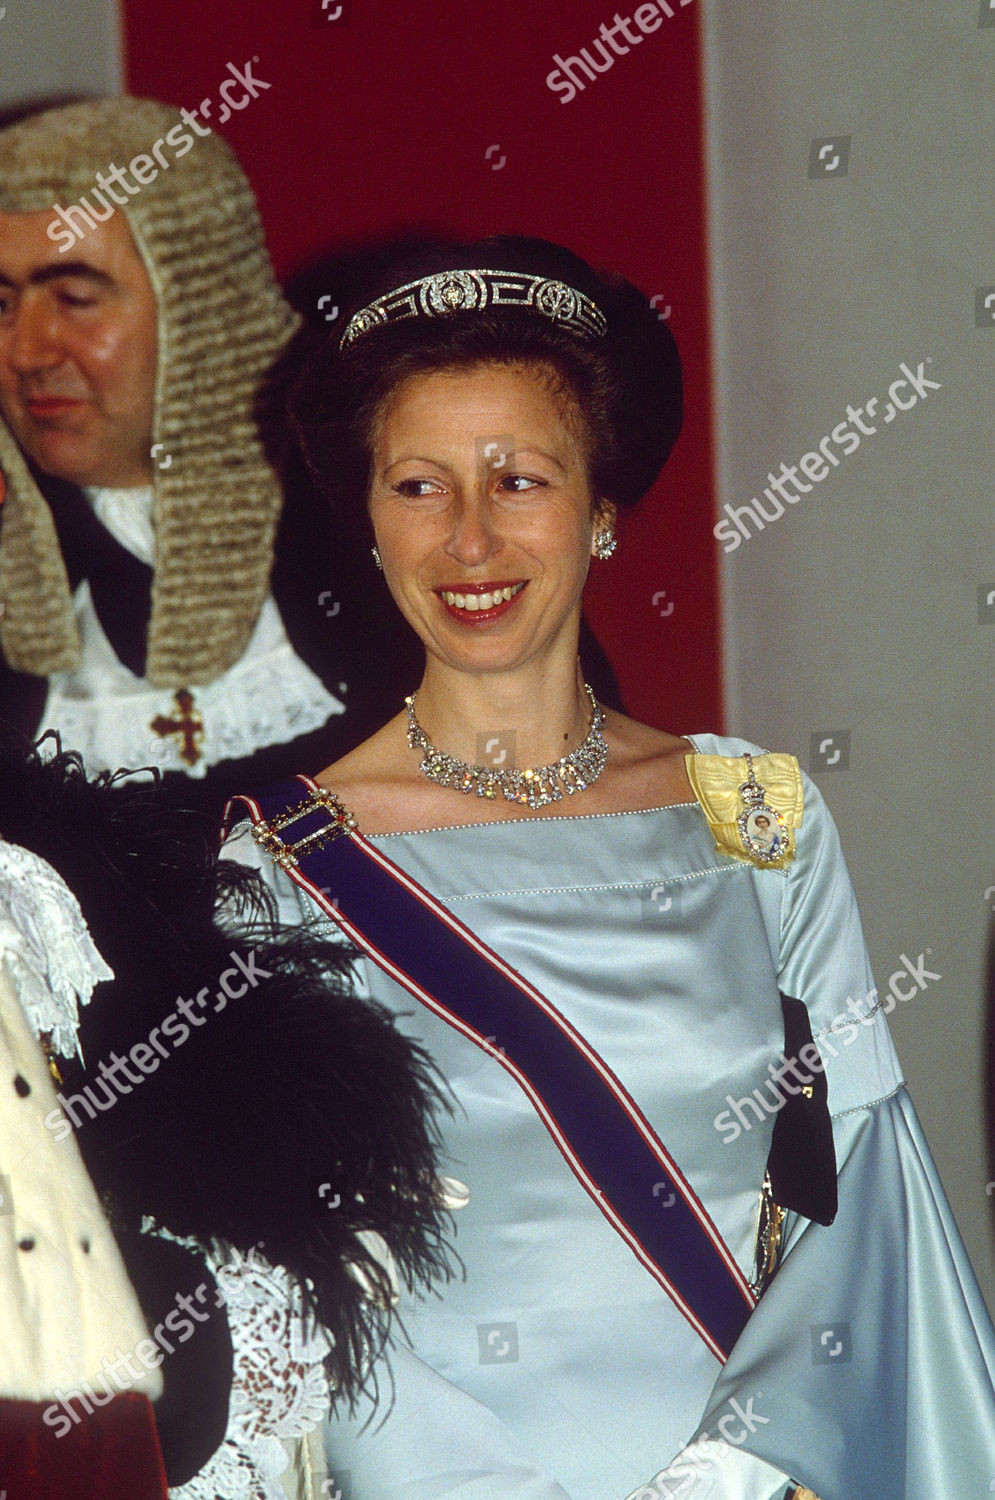 banquet-at-guildhall-in-honour-of-state-visit-of-king-olav-of-norway-london-britain-1988-shutterstock-editorial-145076b.jpg